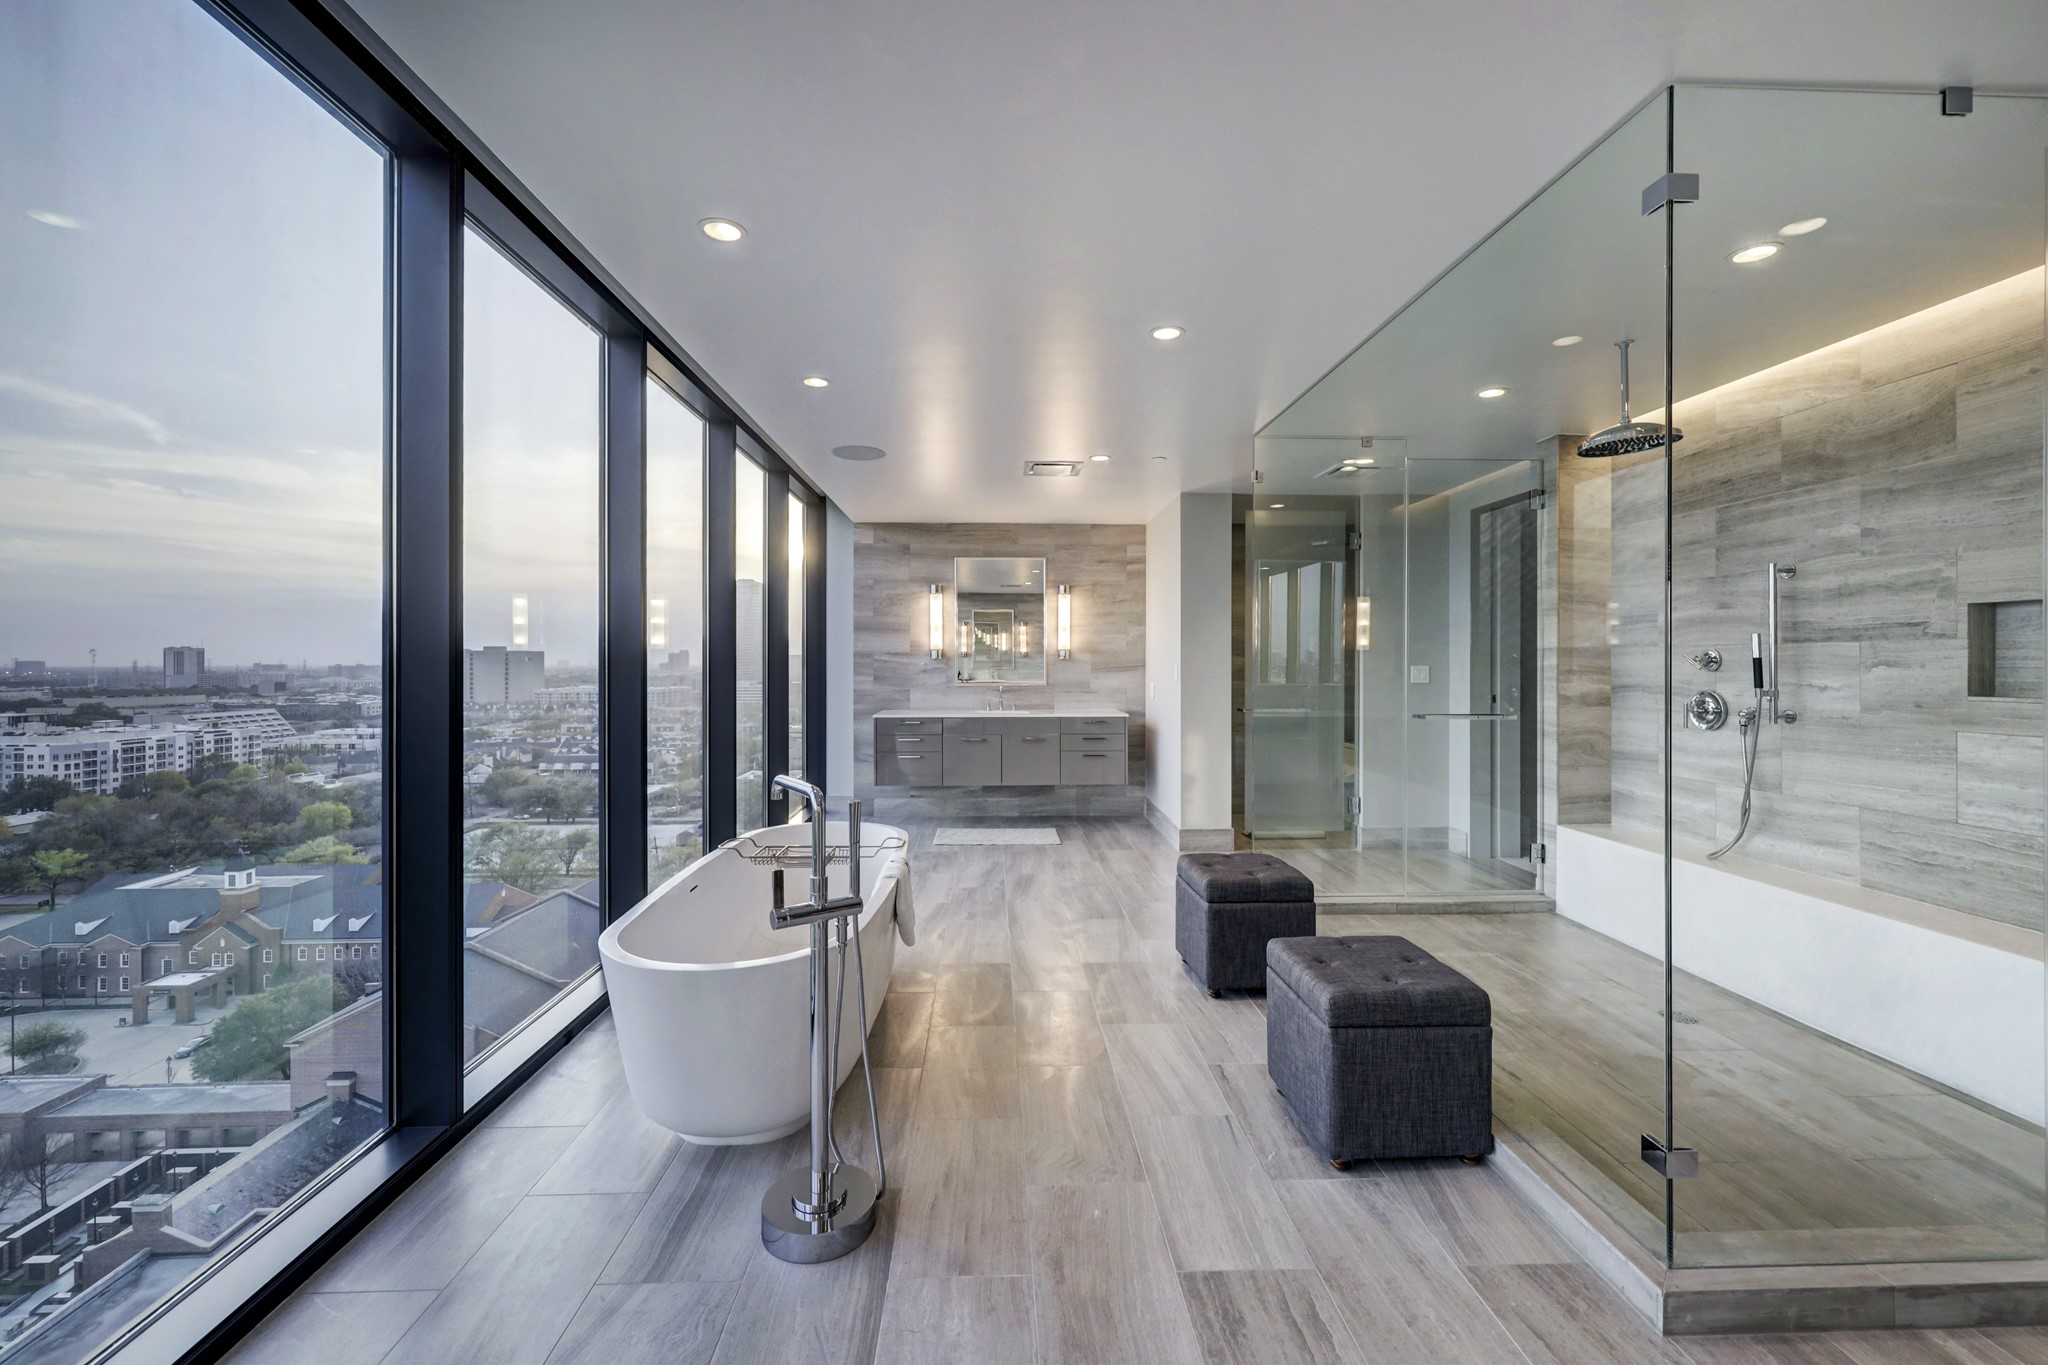 The primary bath is simply gorgeous. Highlights include tile floors, dual Poggenpohl vanities with silestone counters, dual private commode areas, an oversized frameless shower and a freestanding tub with incredible exterior views.